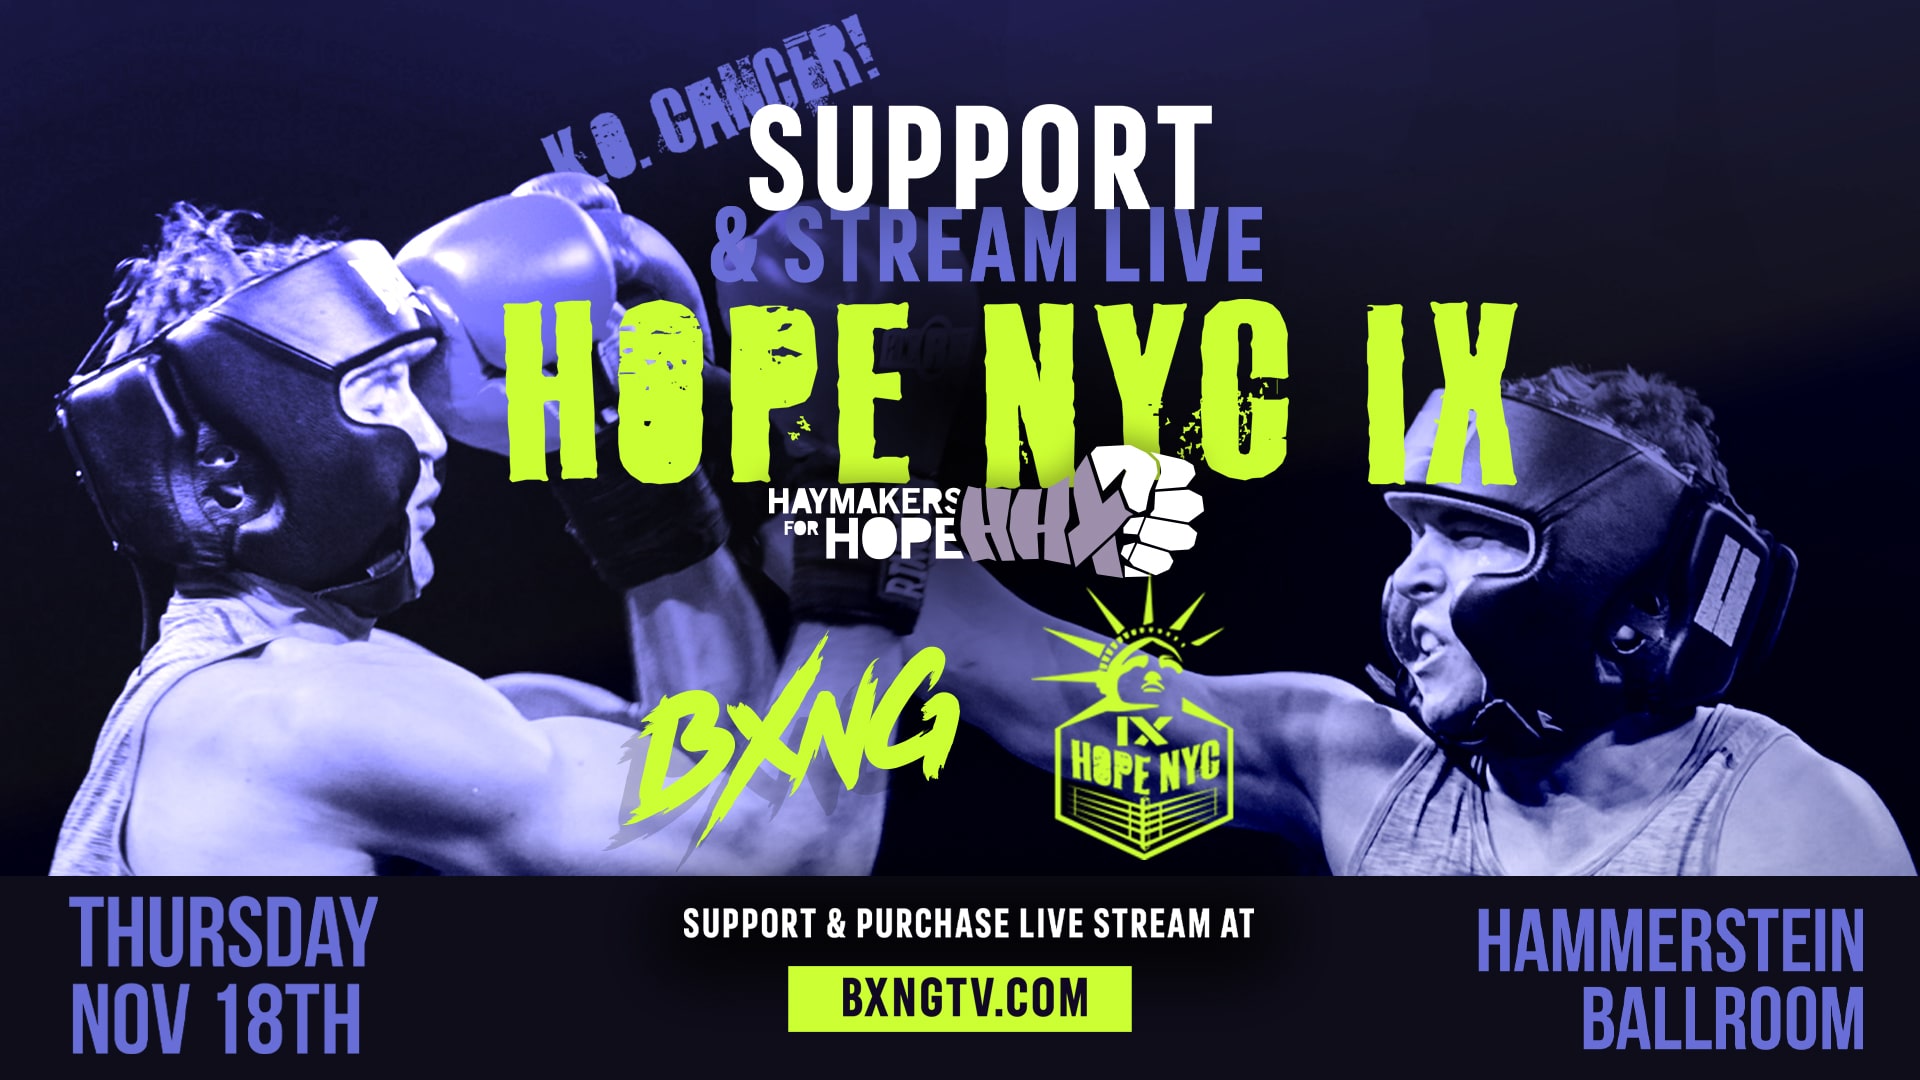 Haymakers for Hope Hope NYC IX BXNG